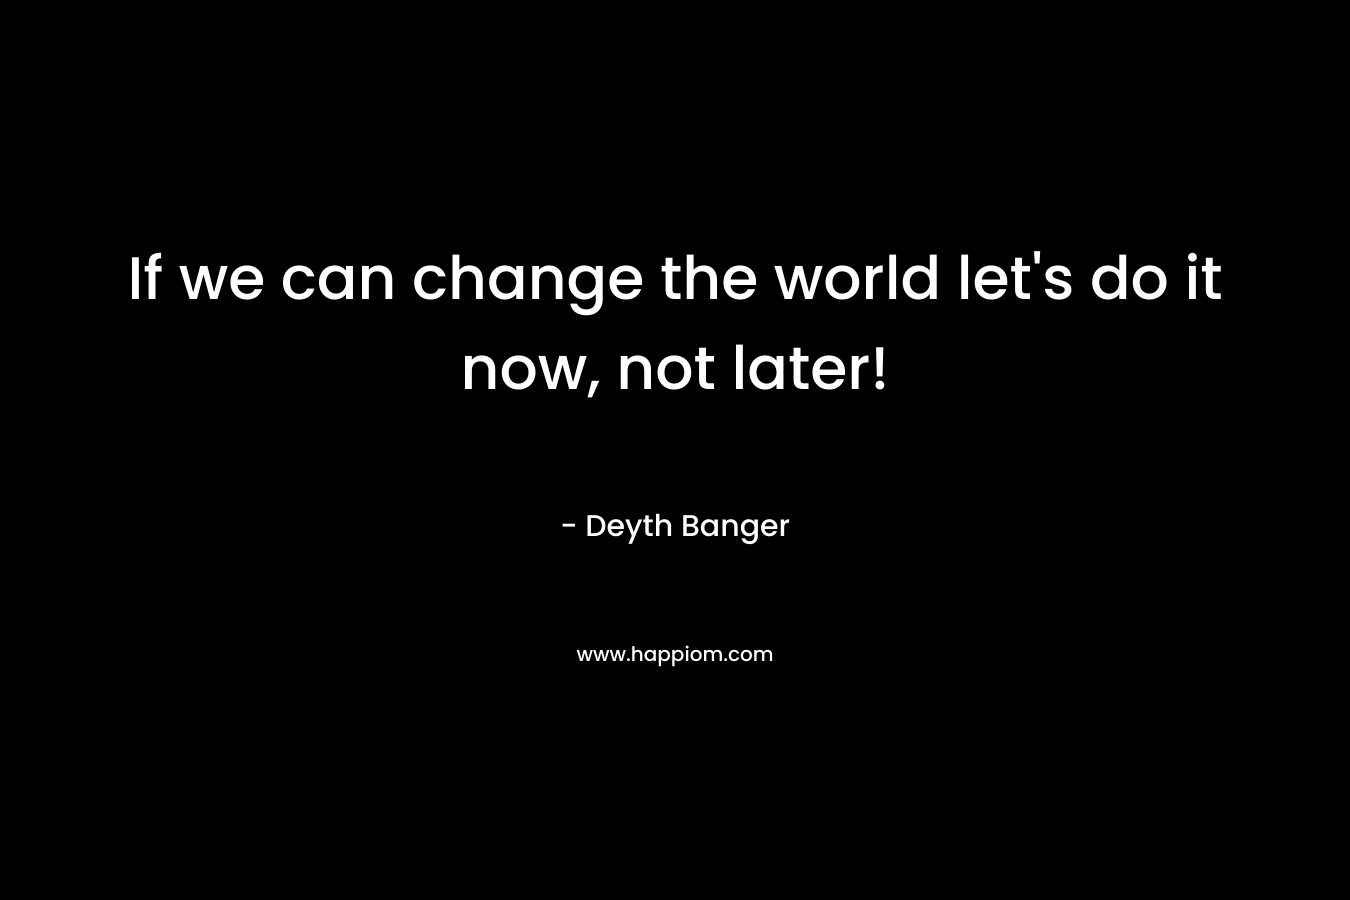 If we can change the world let's do it now, not later!